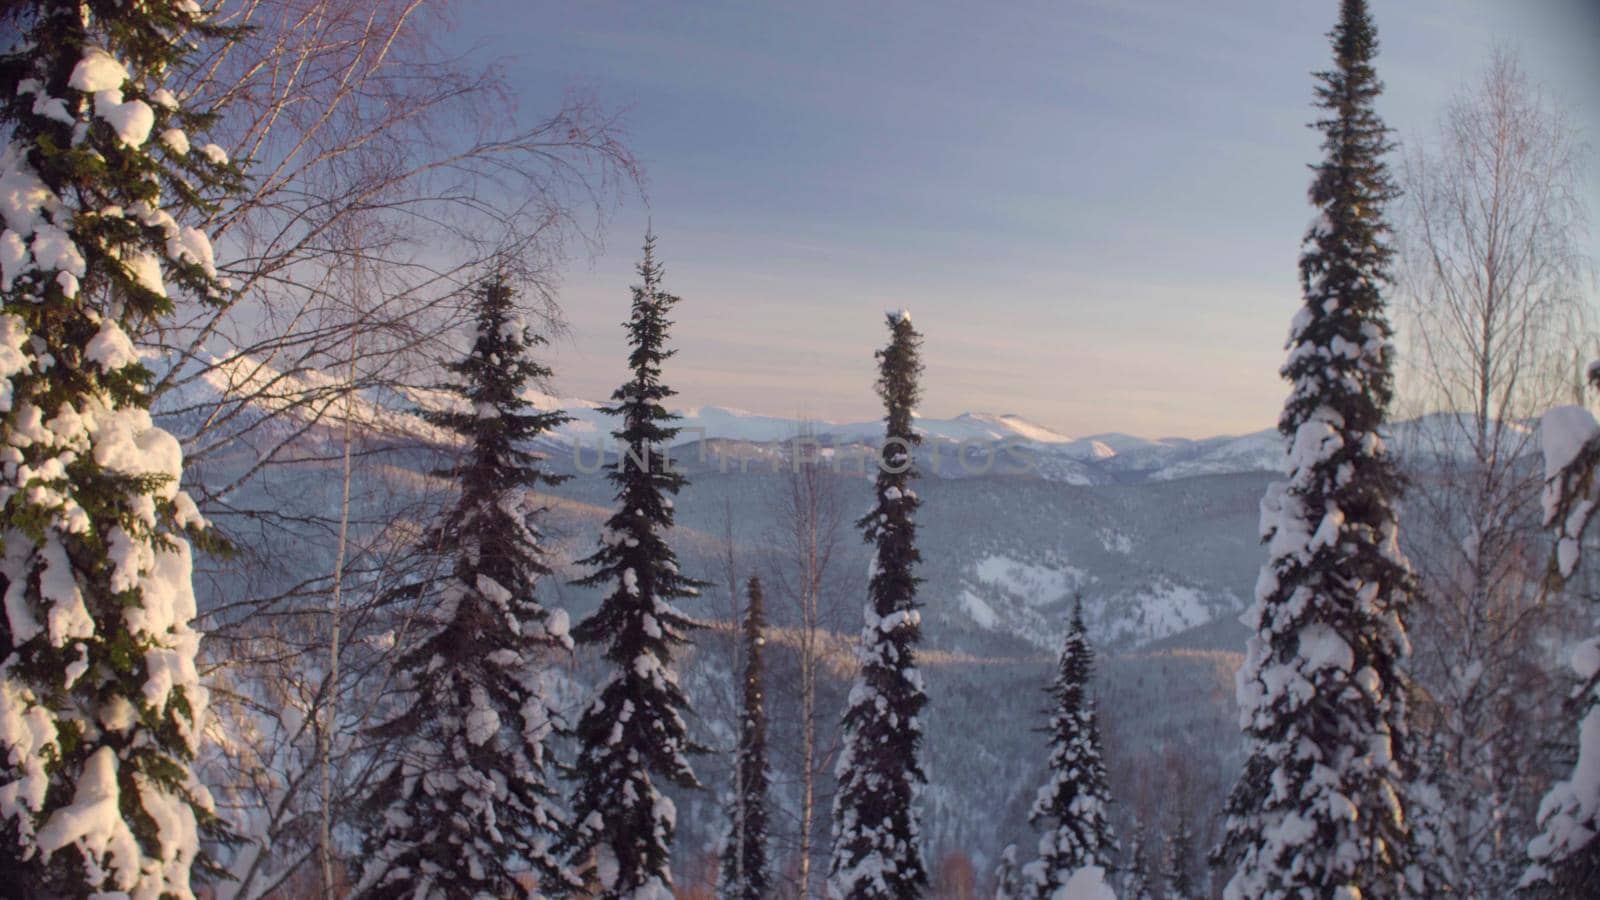 Panoramic view of the winter forest in the Siberian mountains